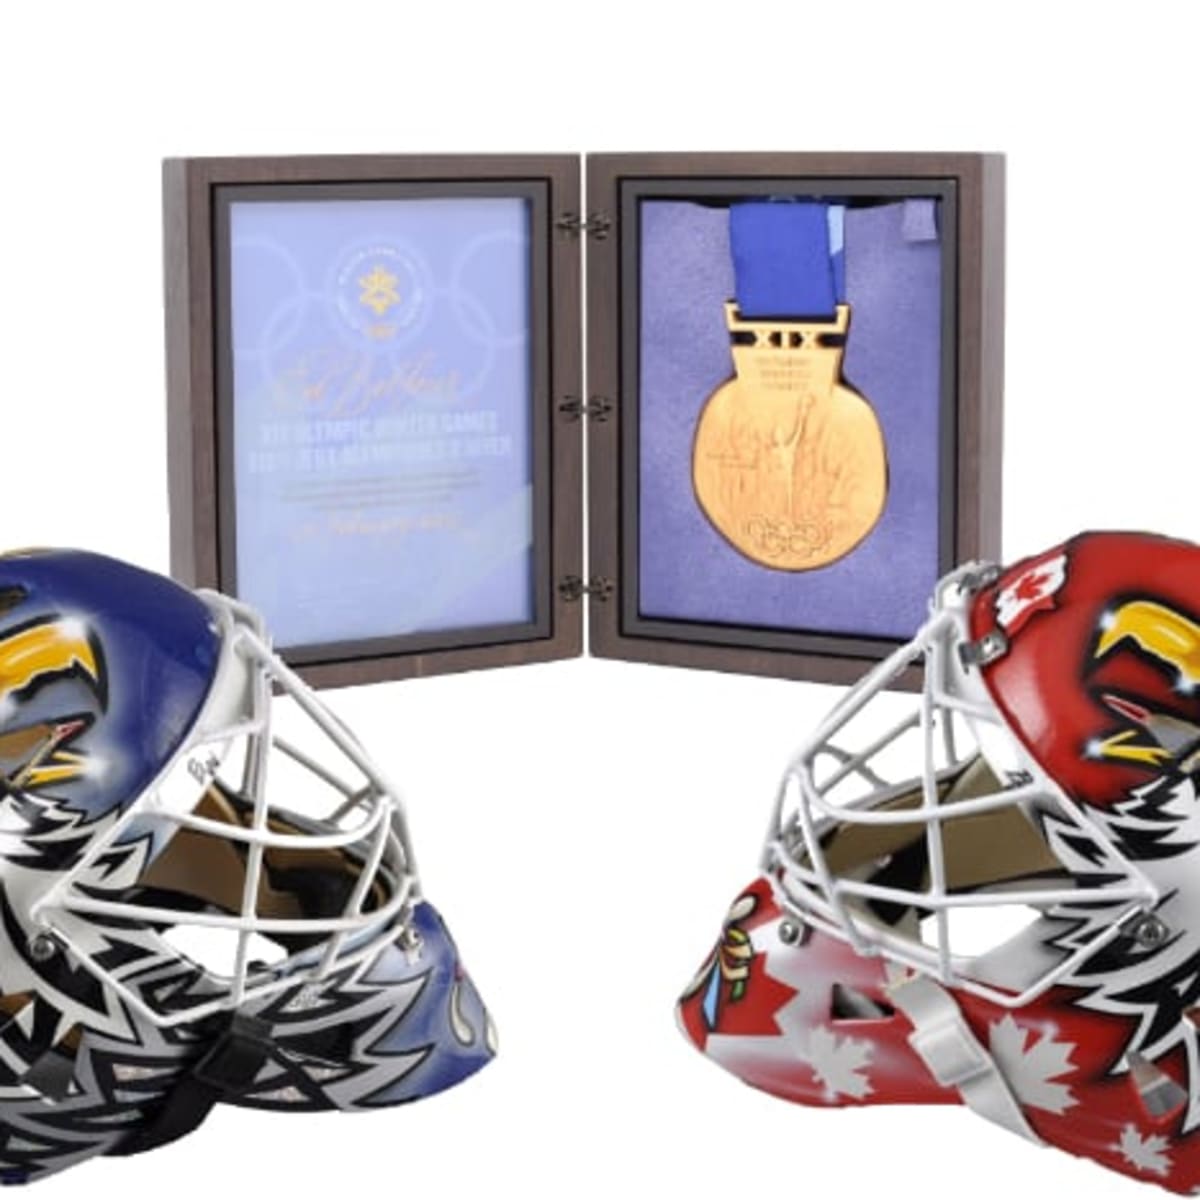 Ed Belfour's Olympic gold medal sells at auction